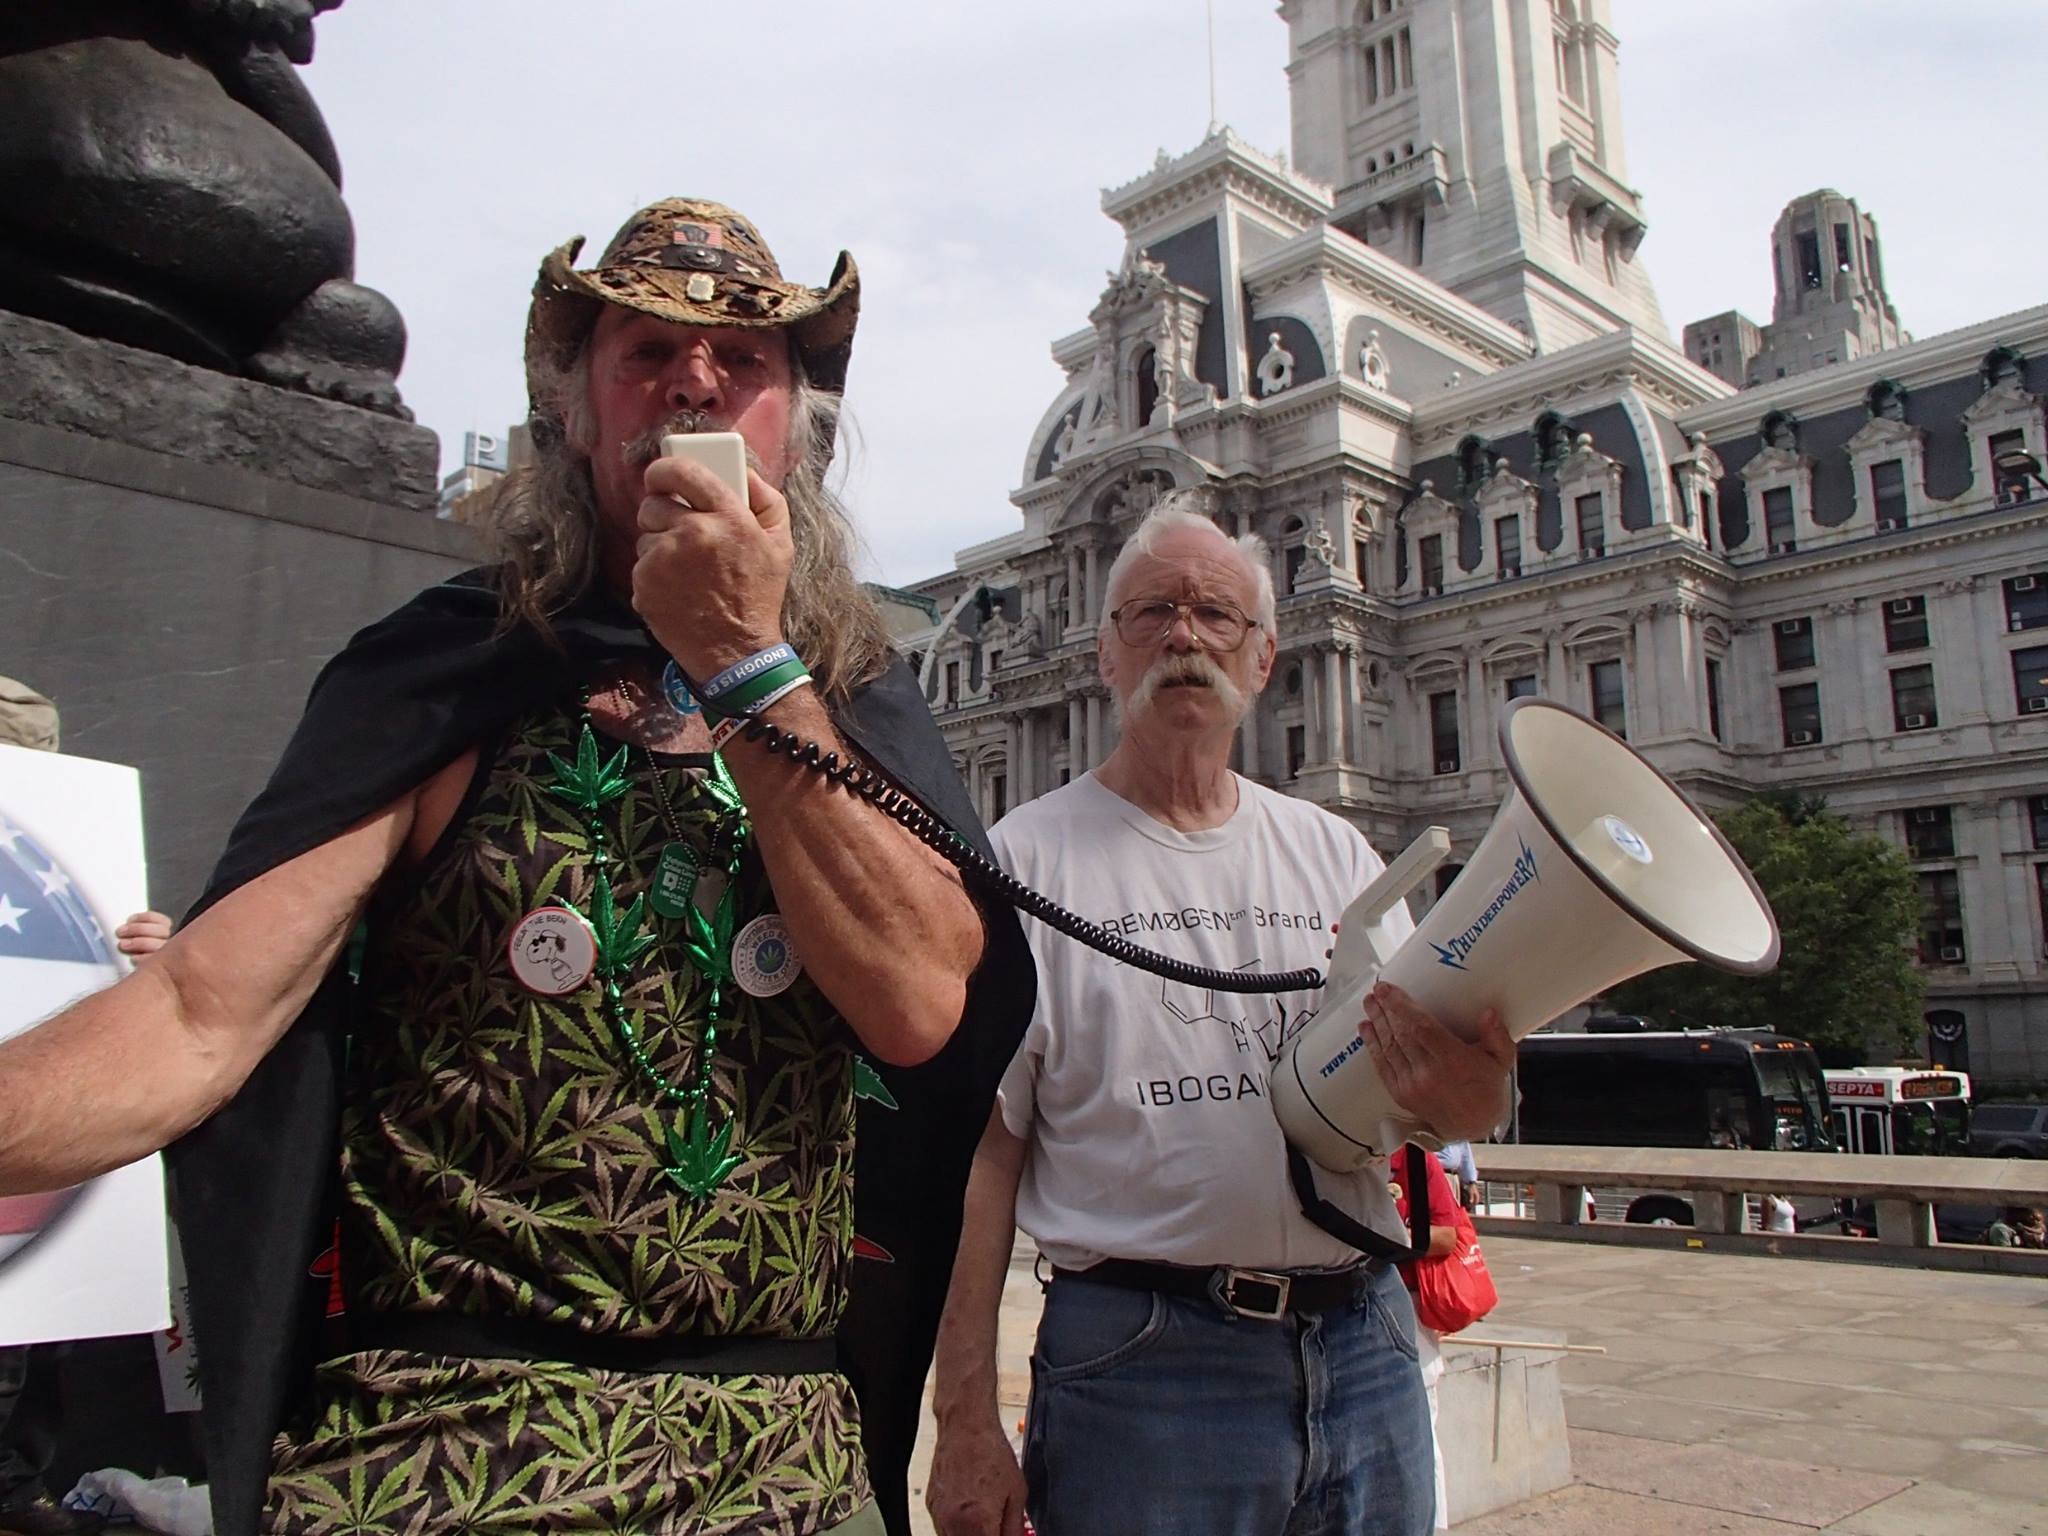 Dana Beal, the longtime Yippie and drug-legalization advocate, at right, at a pot rally.